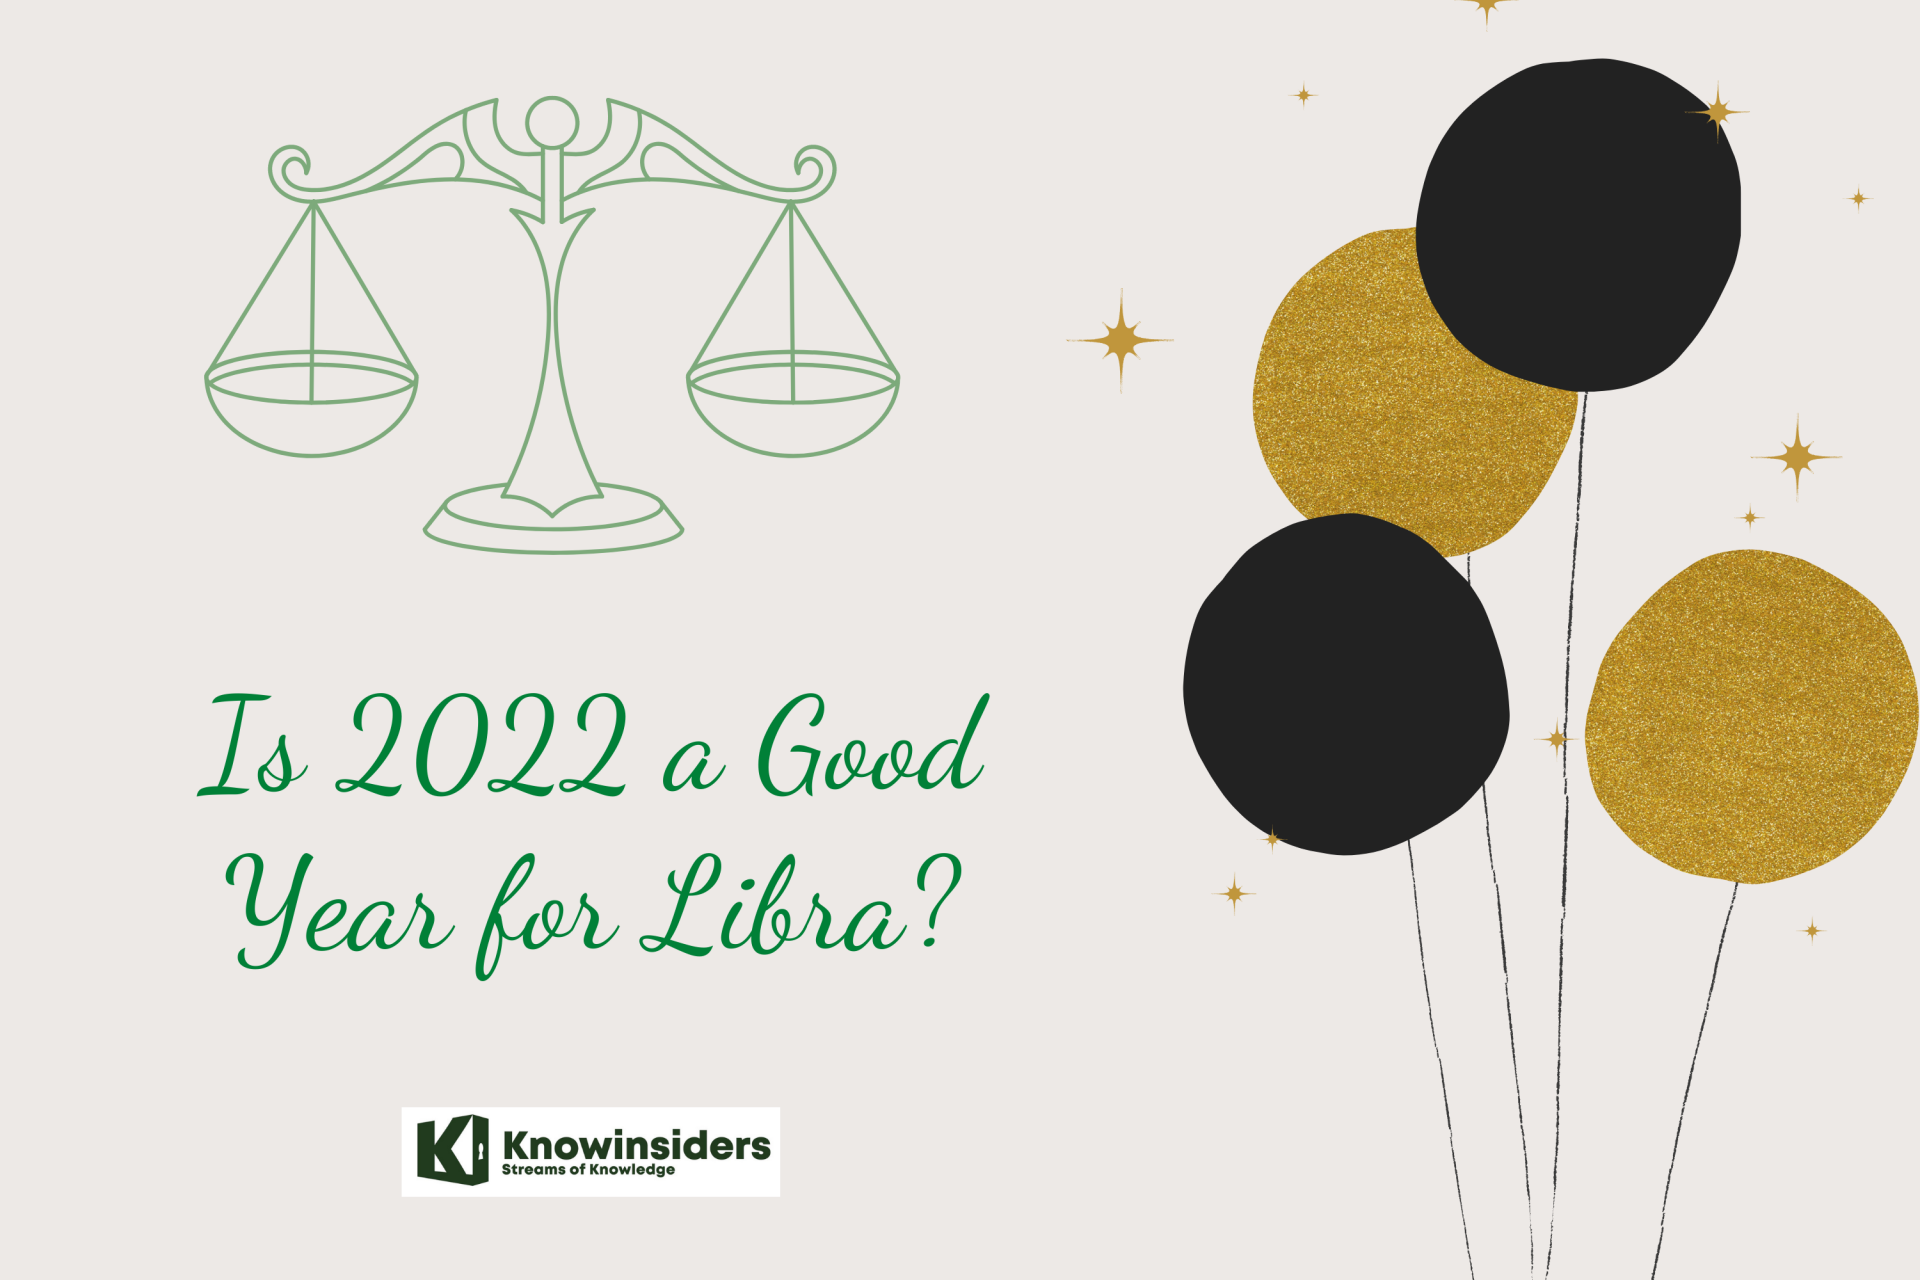 Is 2022 a Good Year for Libra?